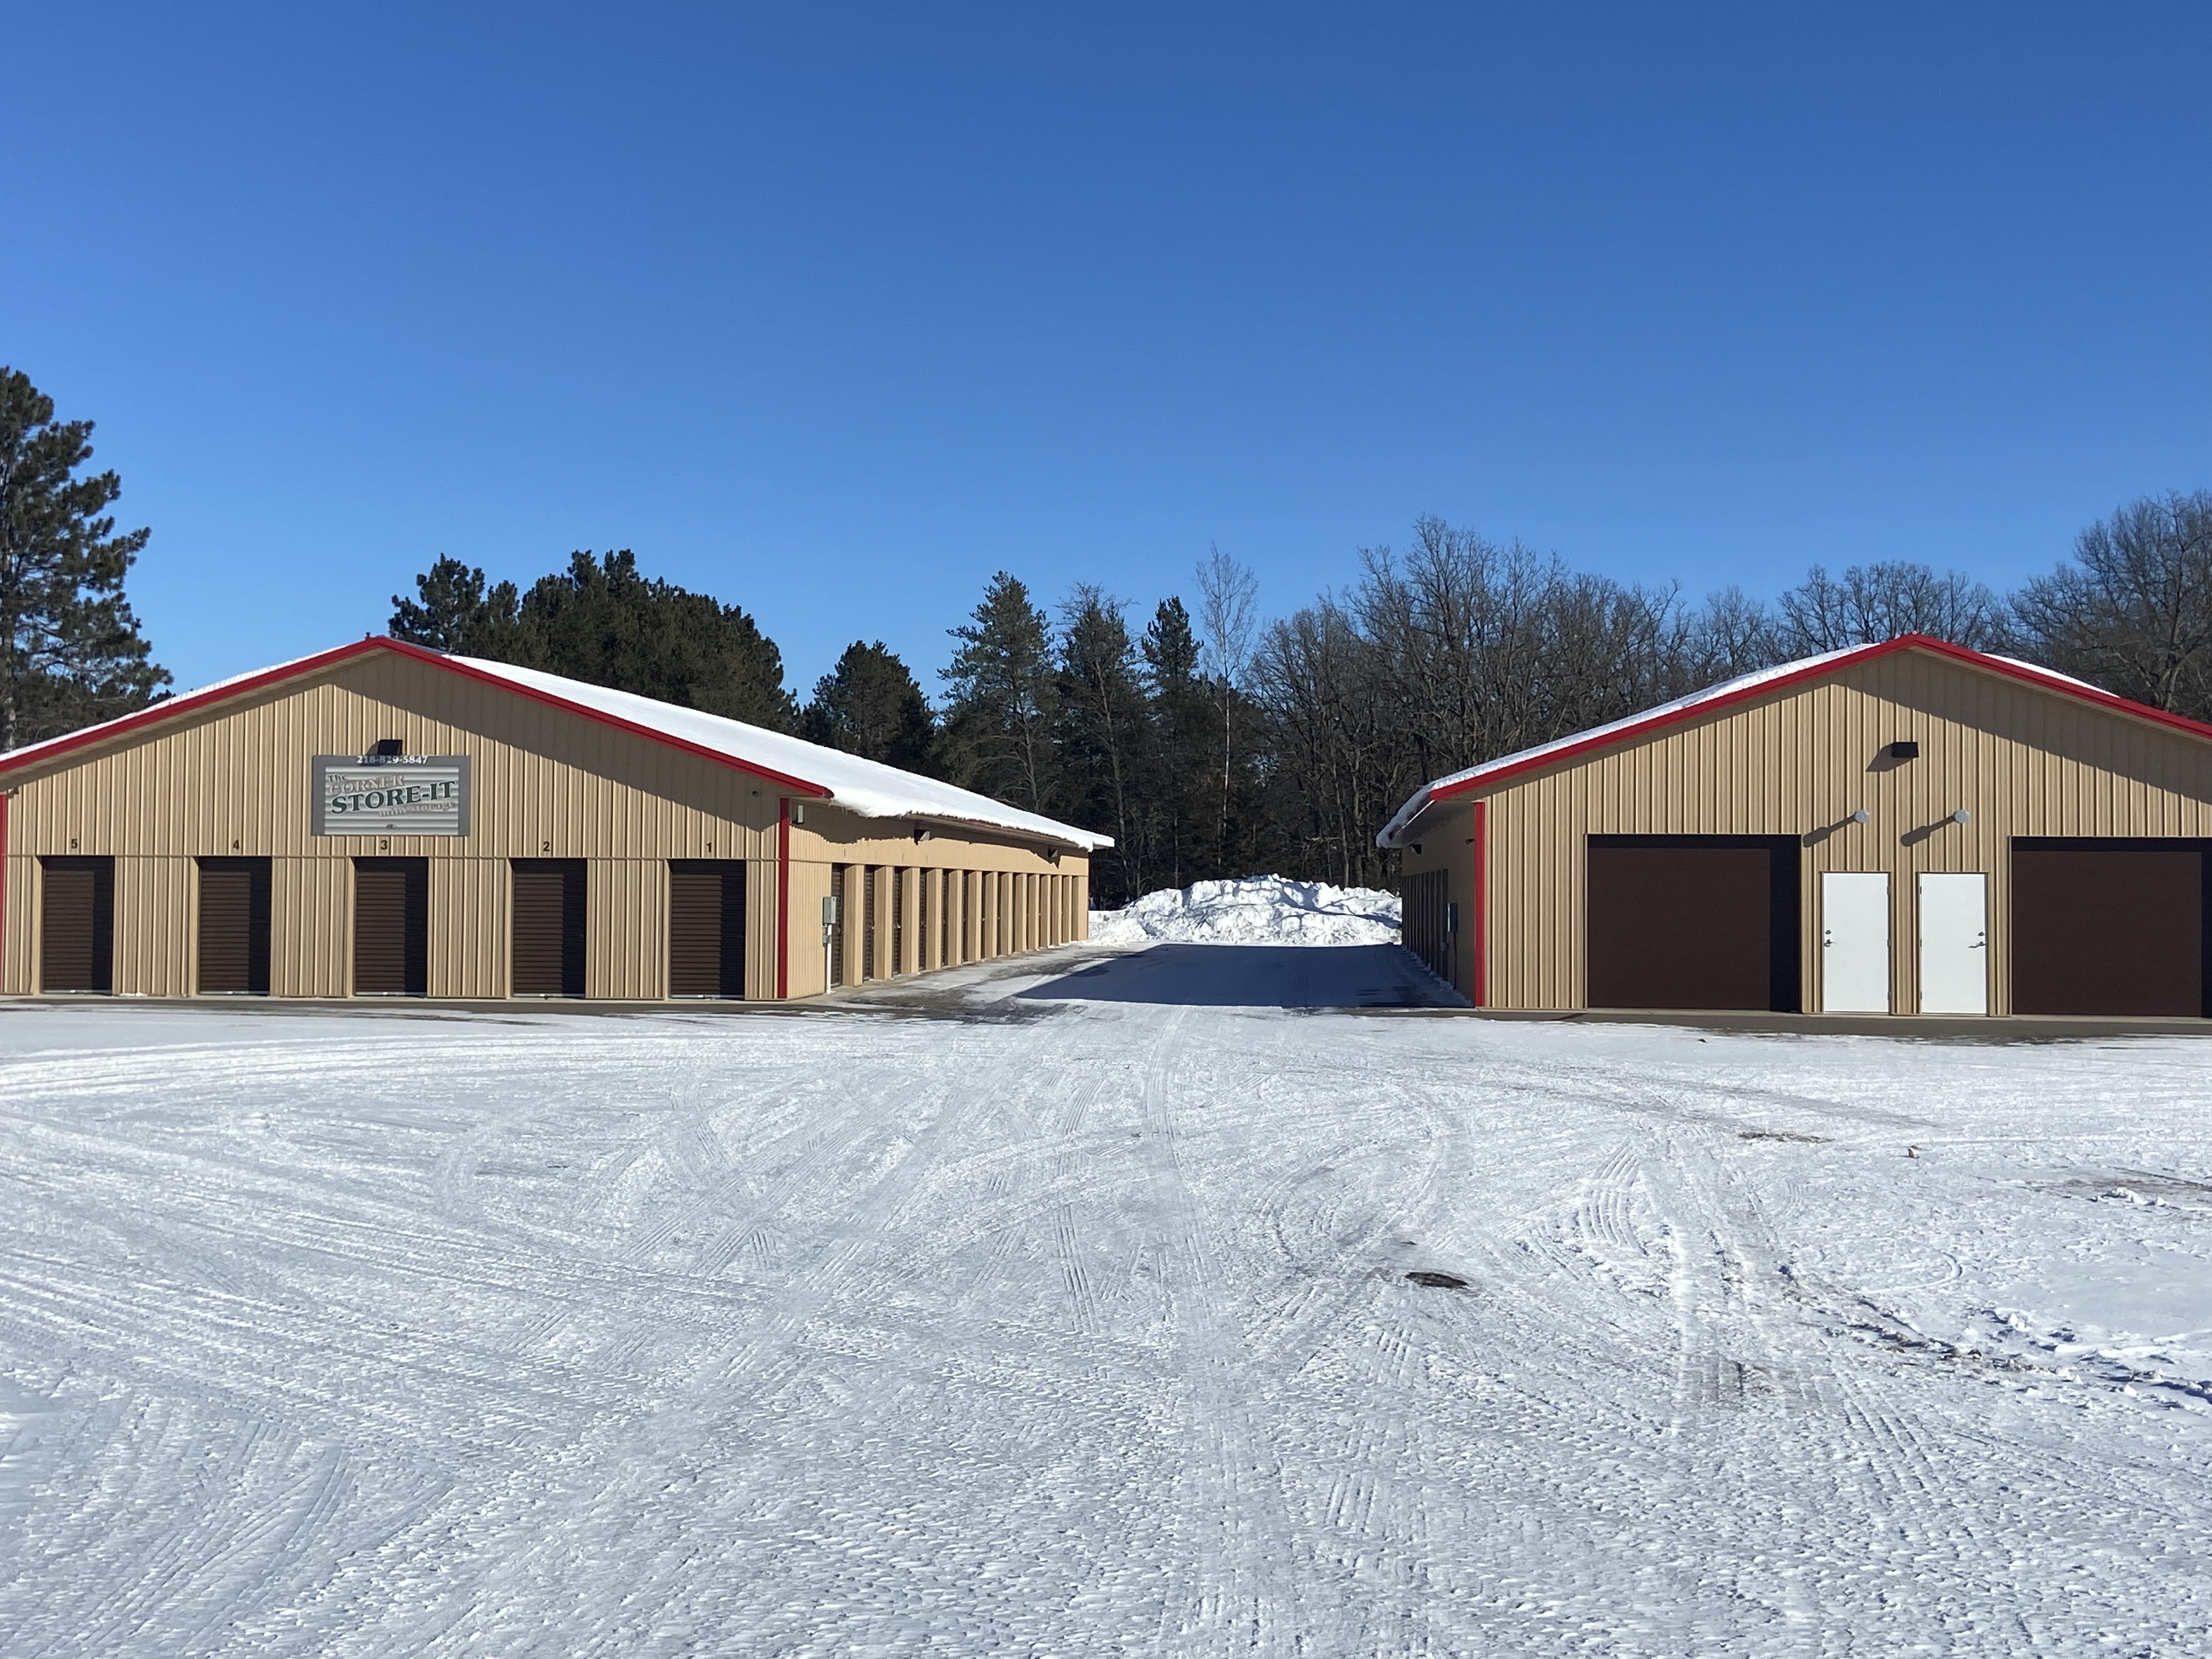 two self storage buildings with drive up access units